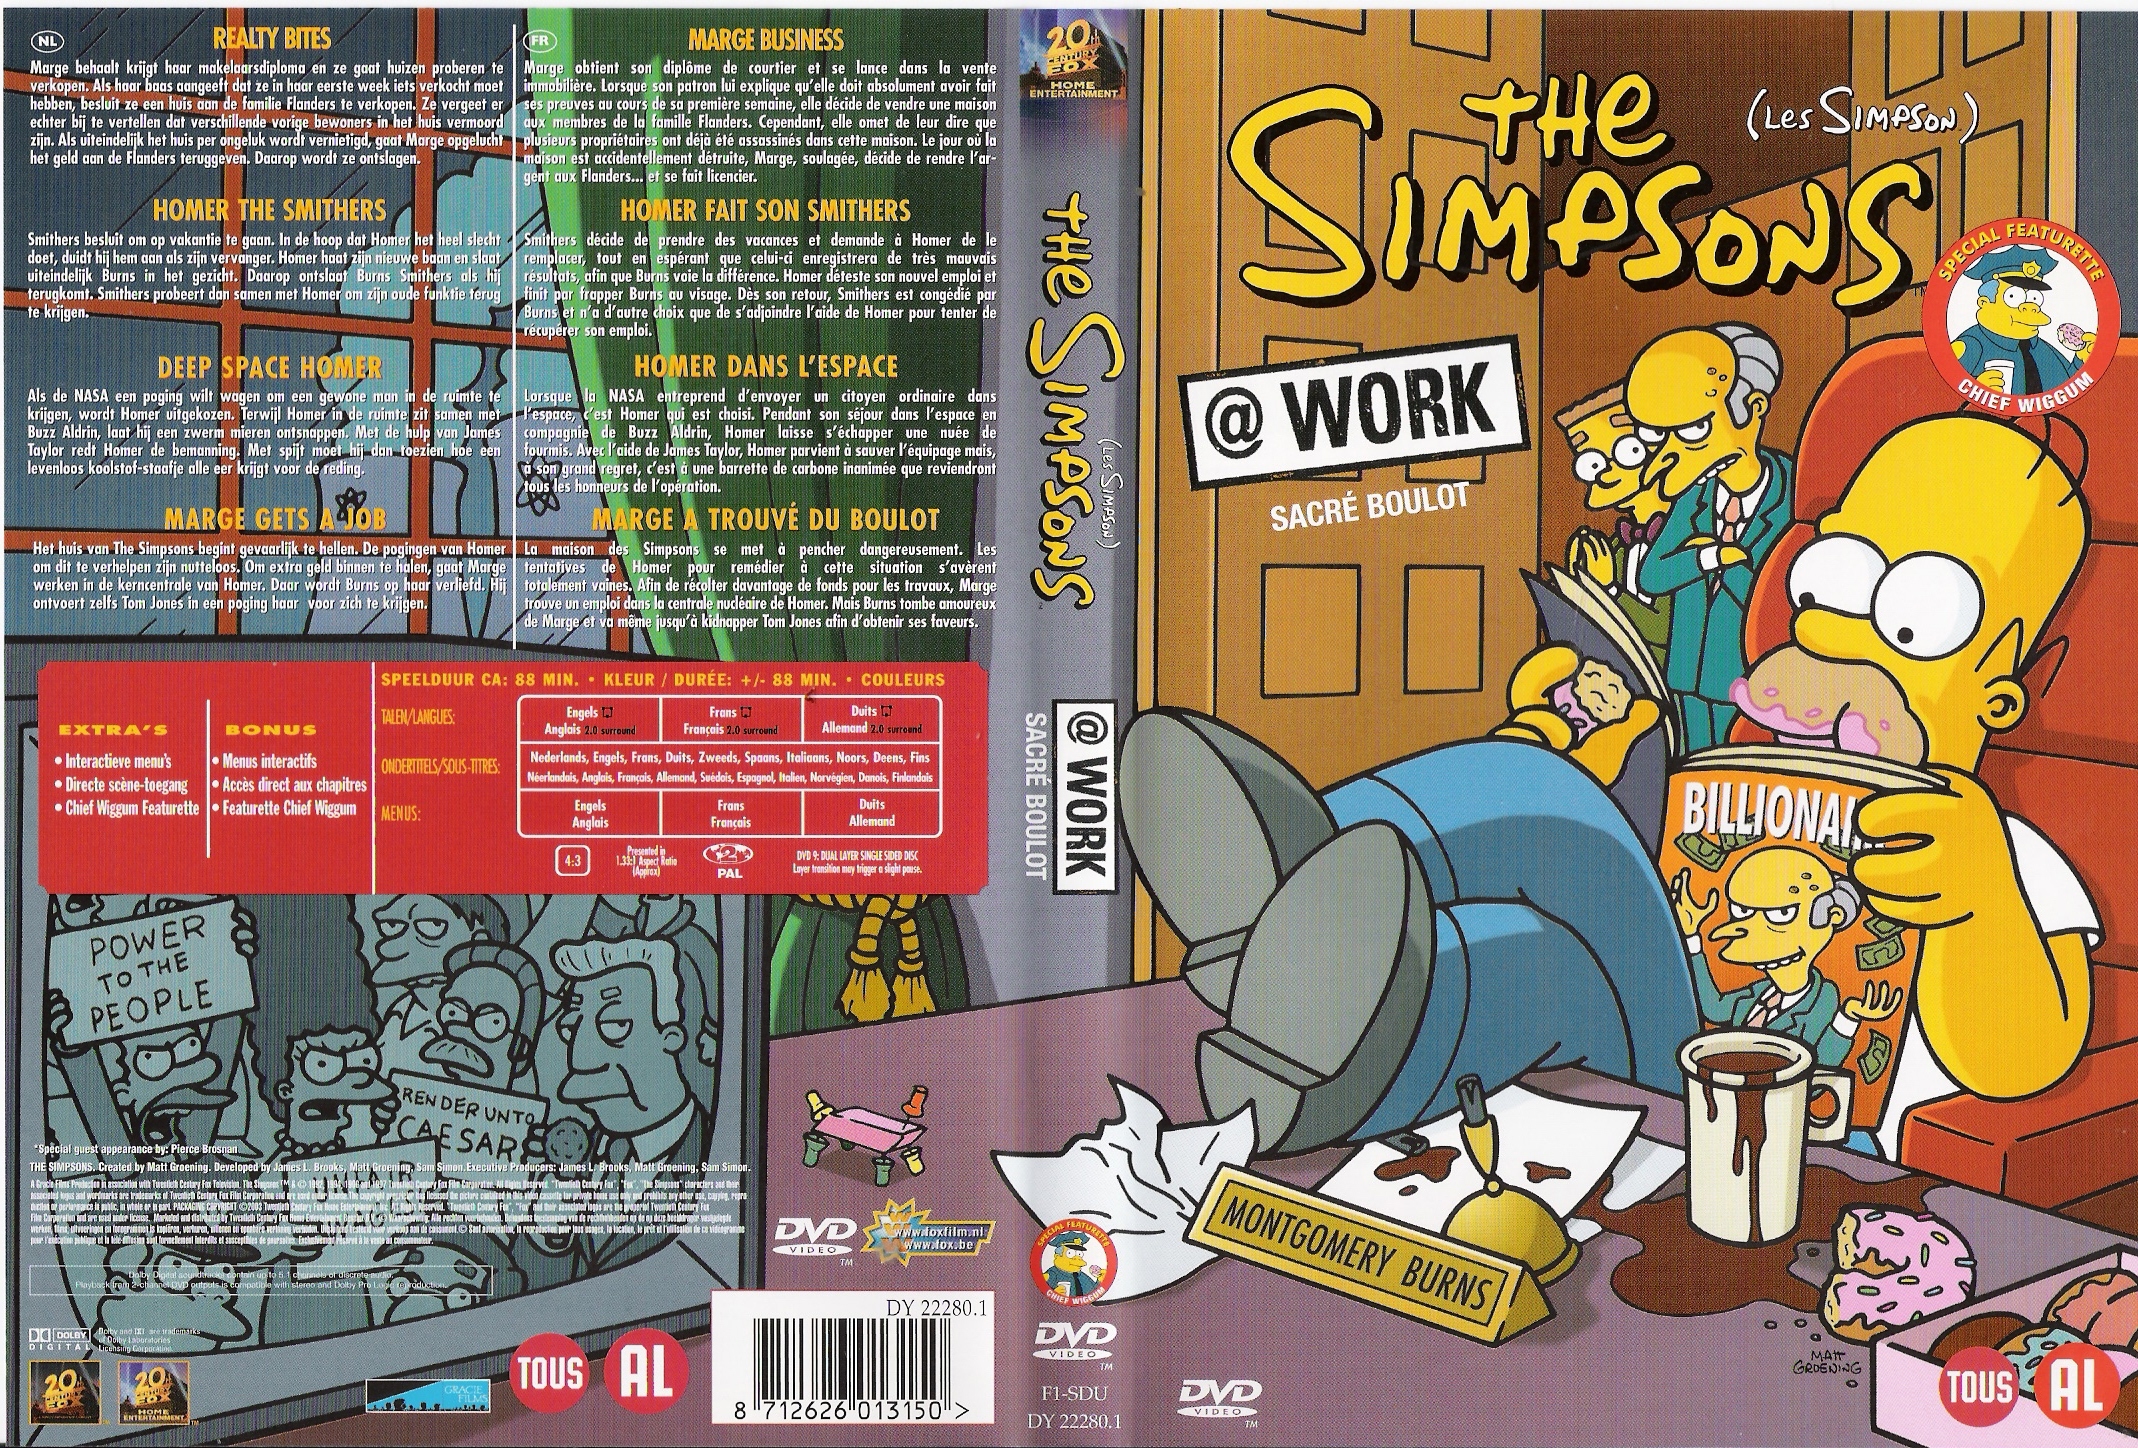 The Simpsons @ Work